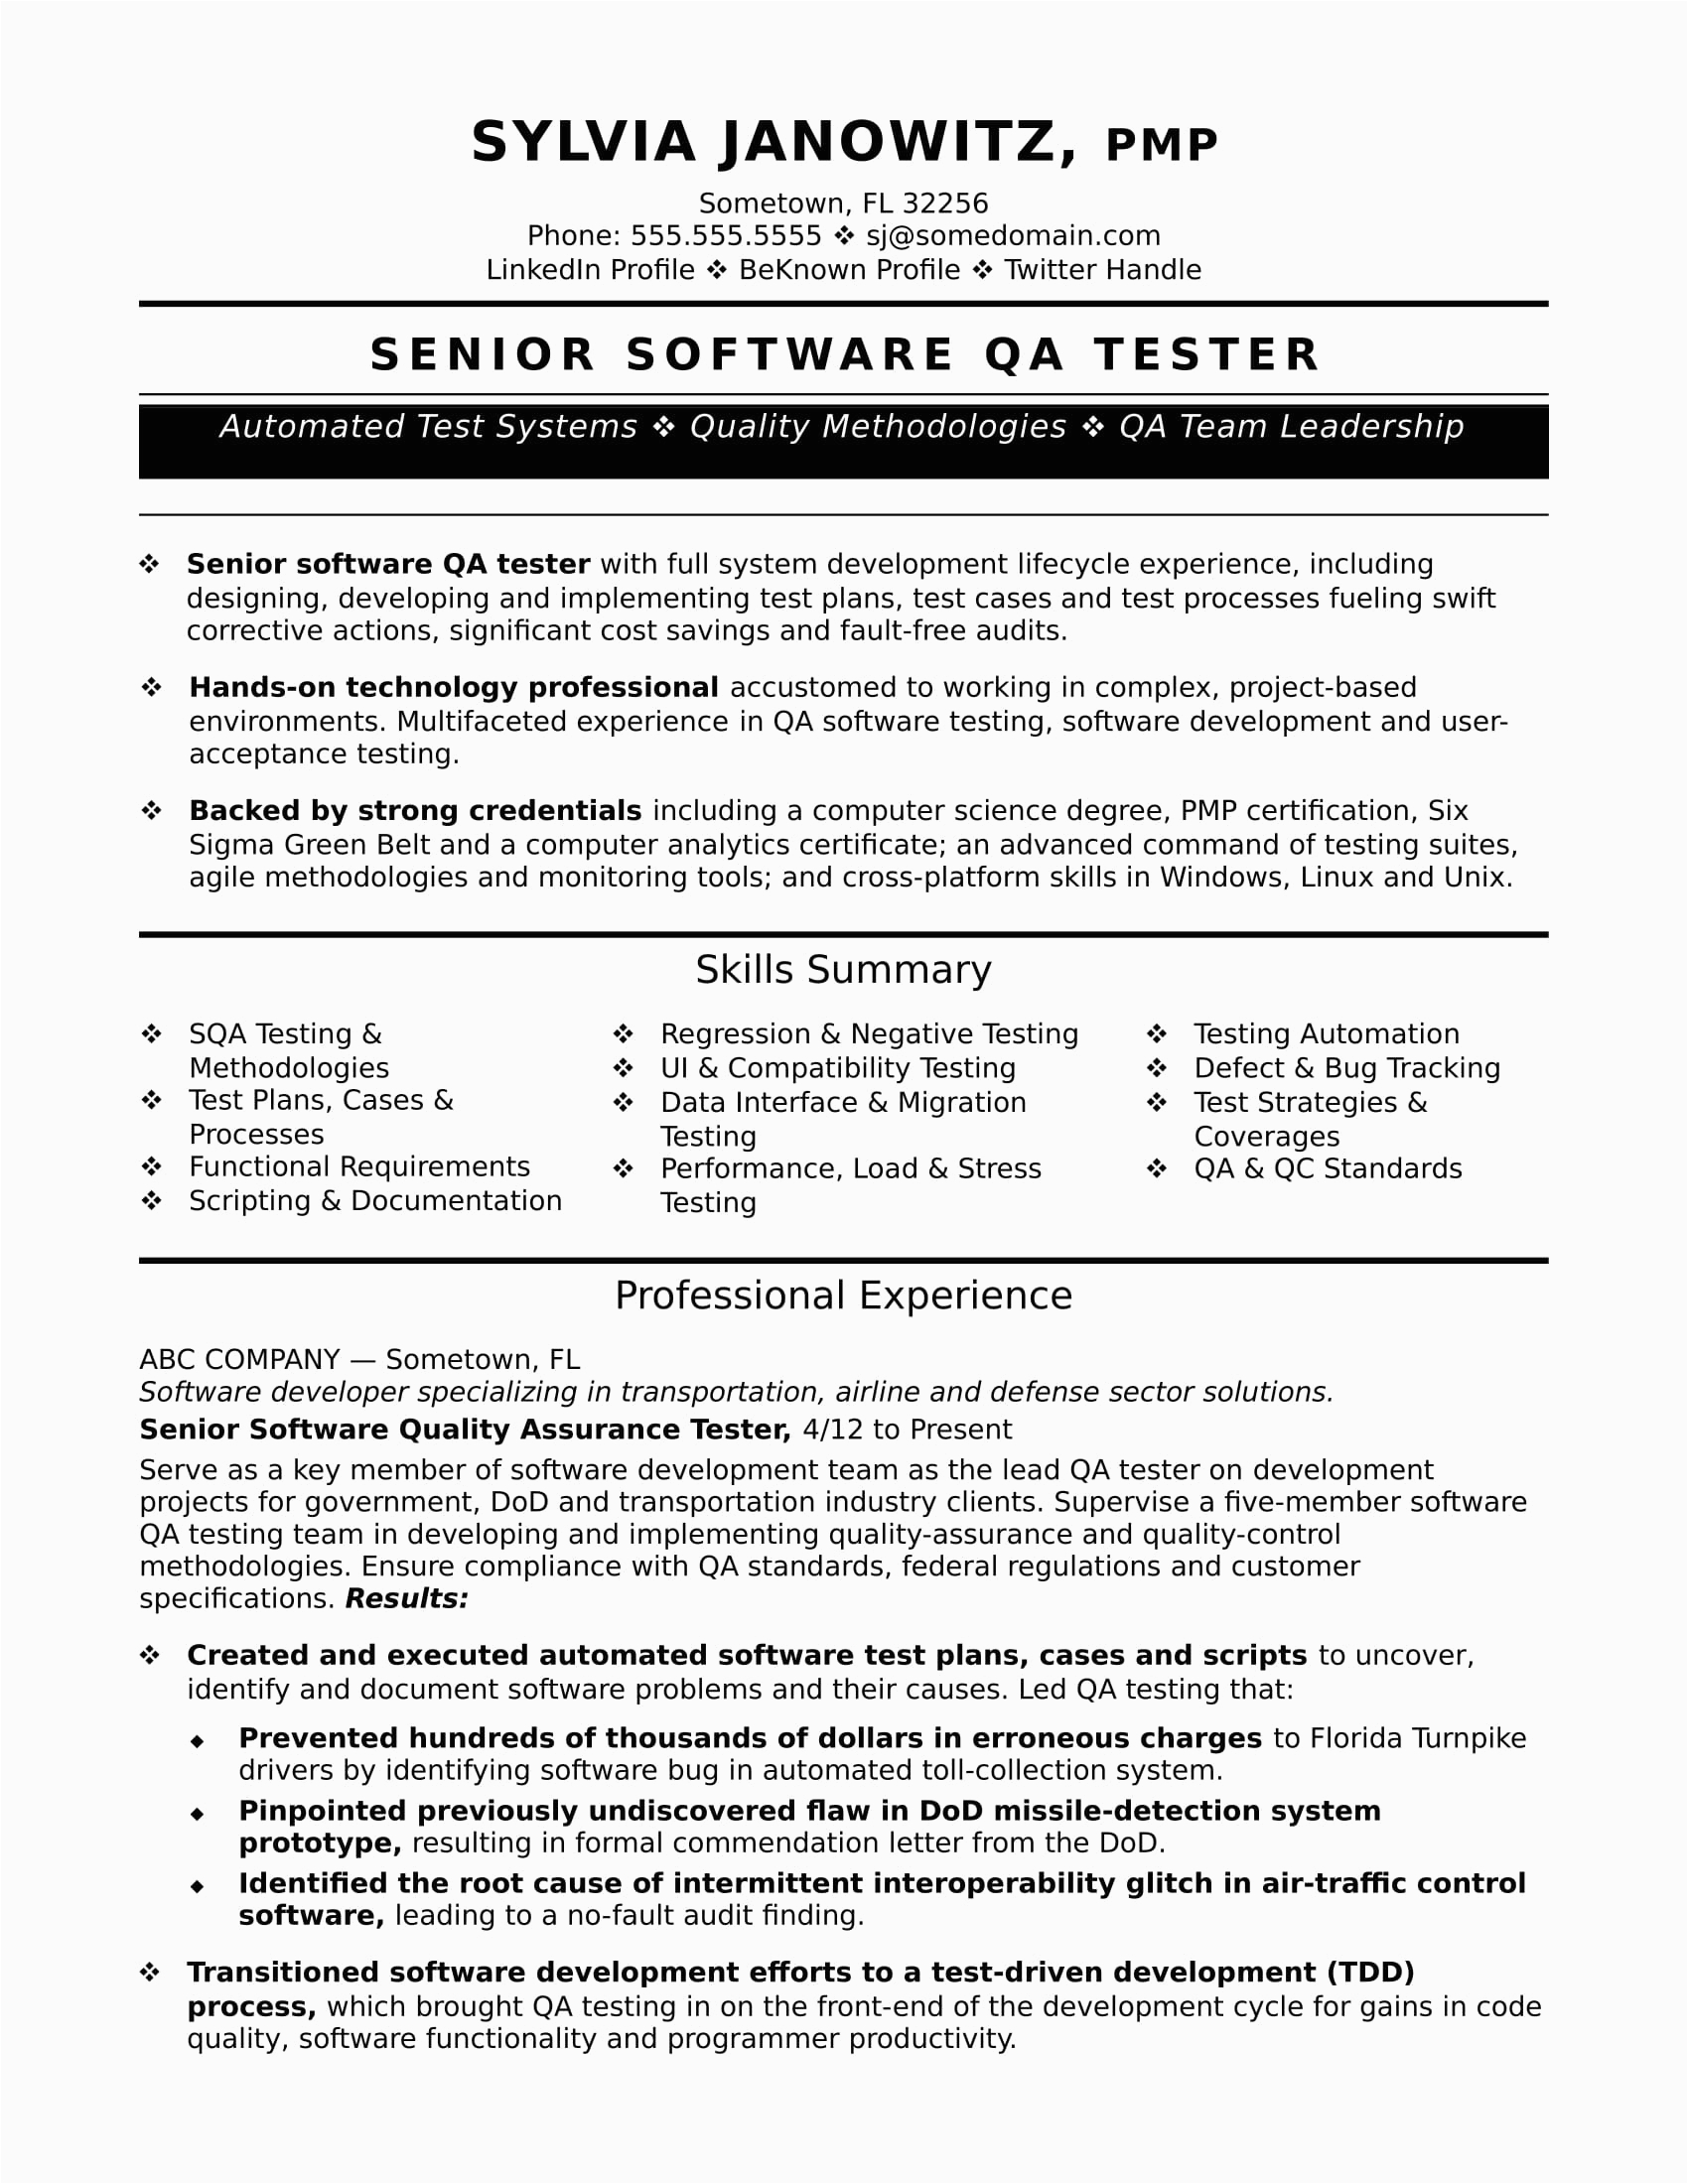 Resume Template for Experienced software Tester Experienced Qa software Tester Resume Sample